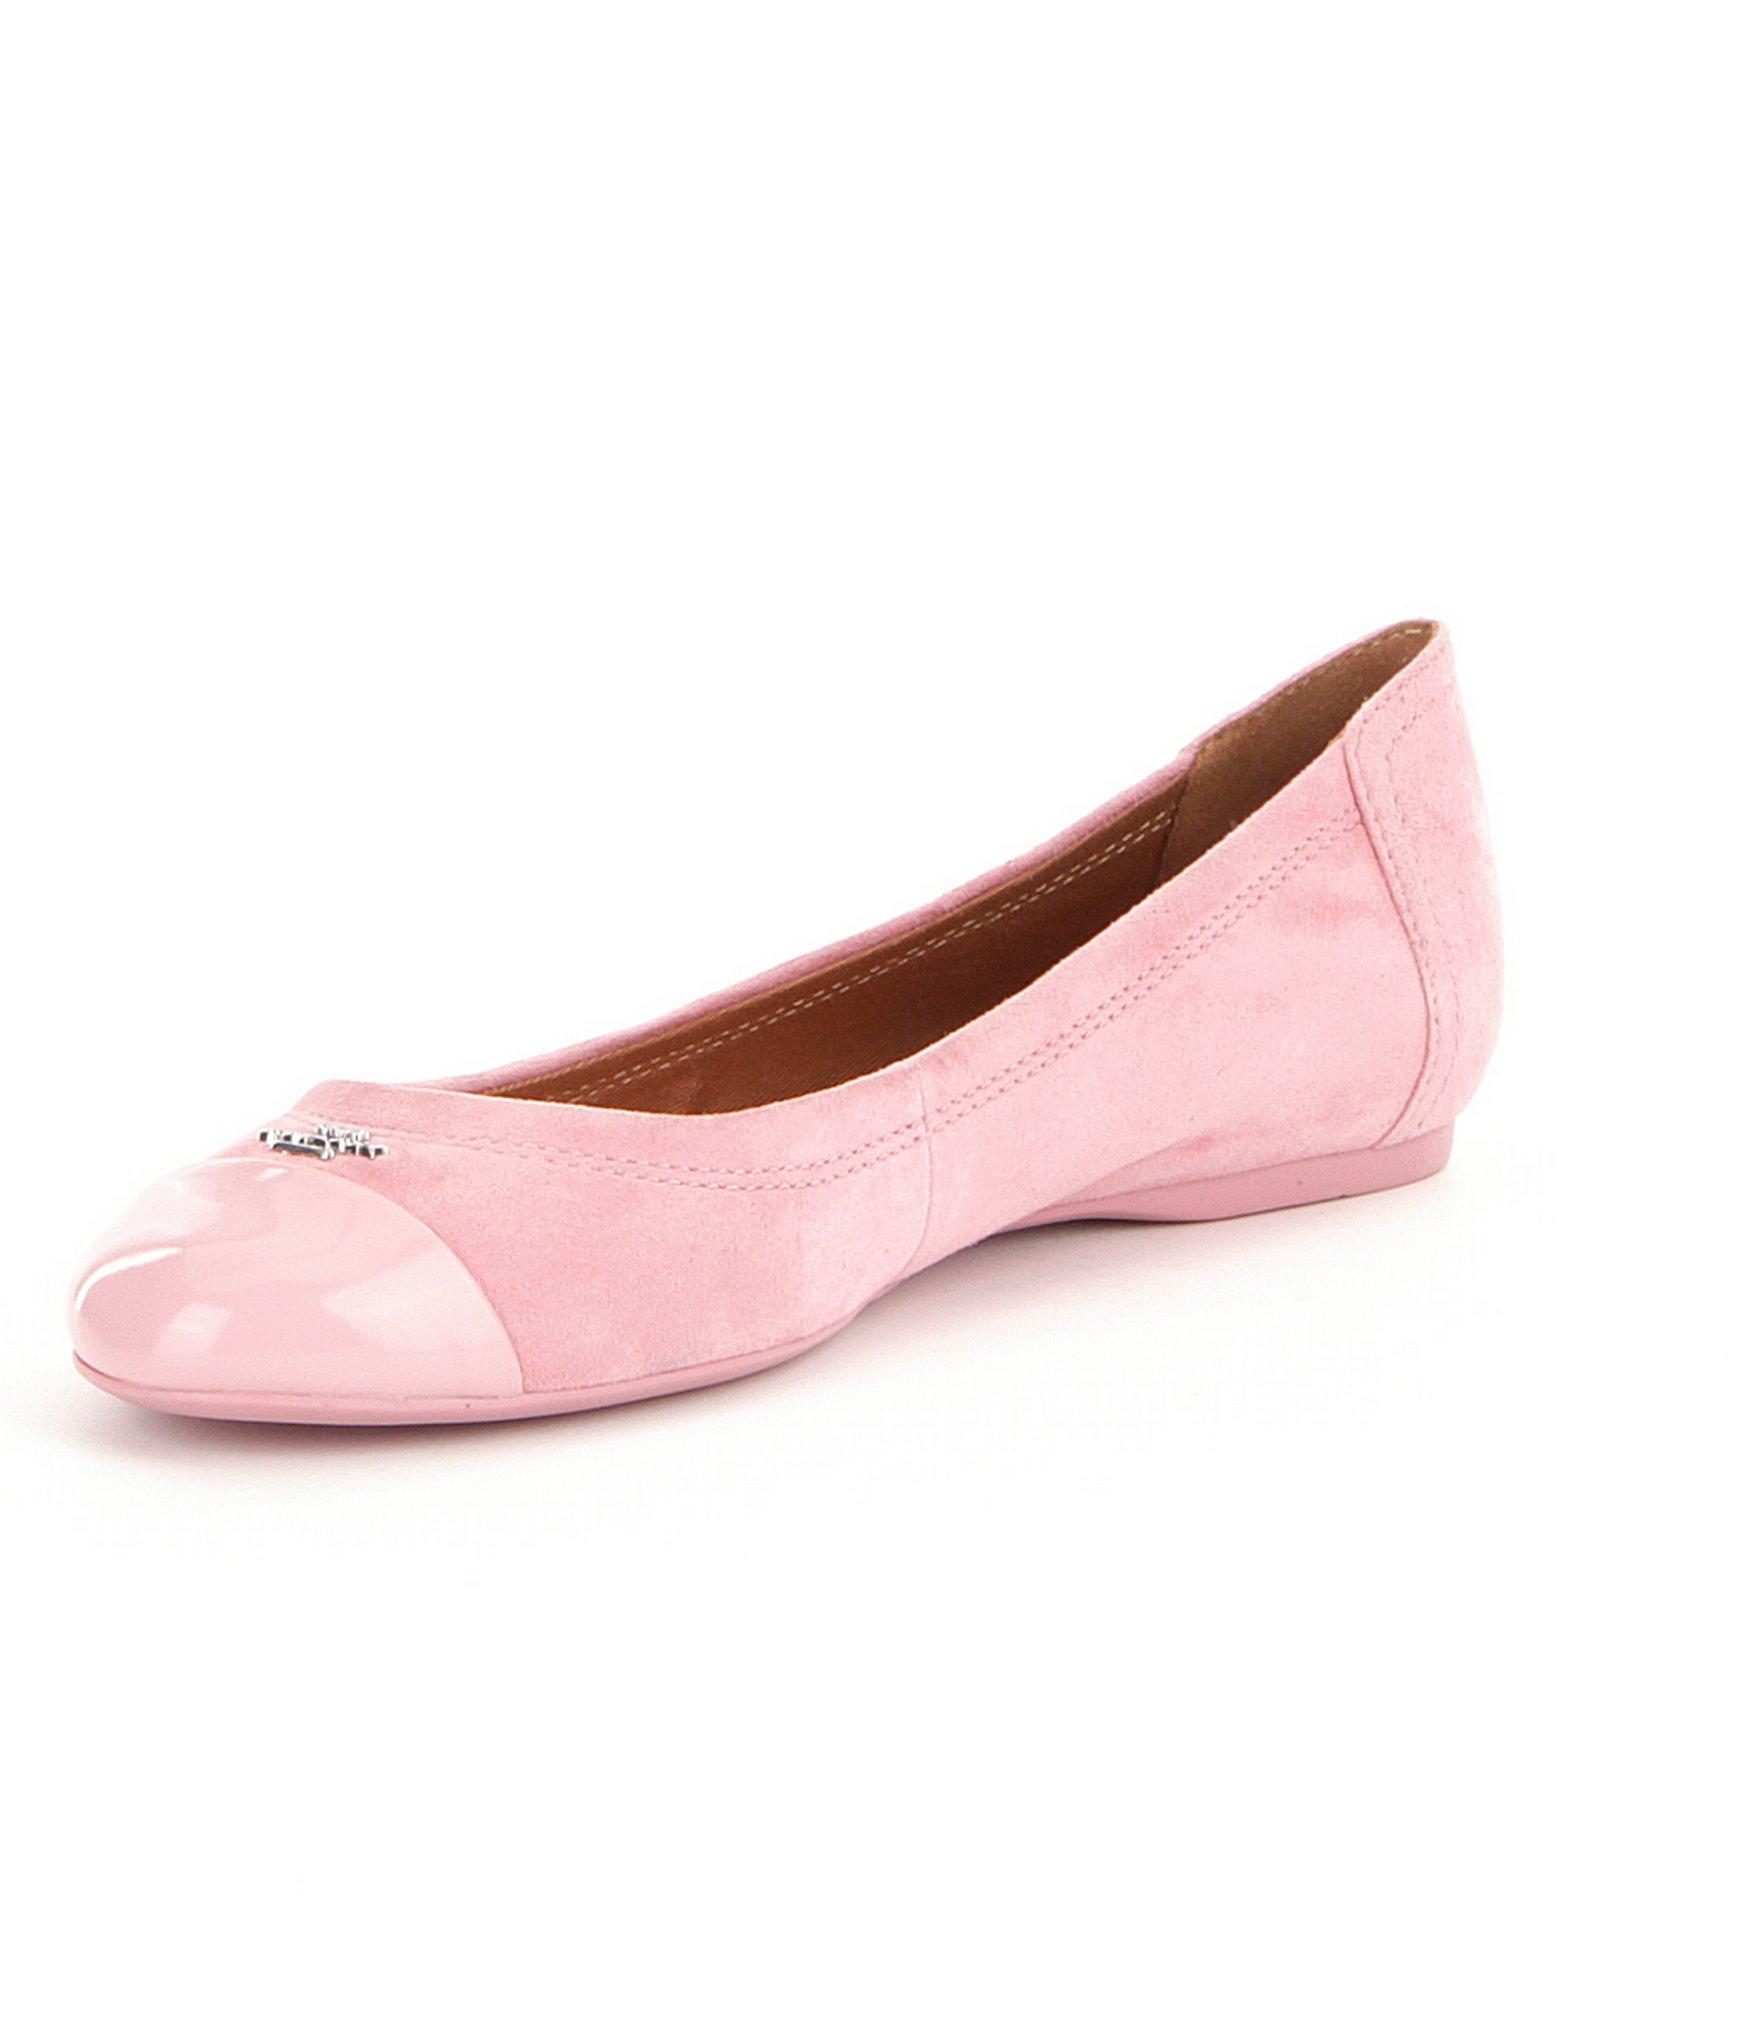 Lyst - Coach Chelsea Suede Ballet Flats in Pink